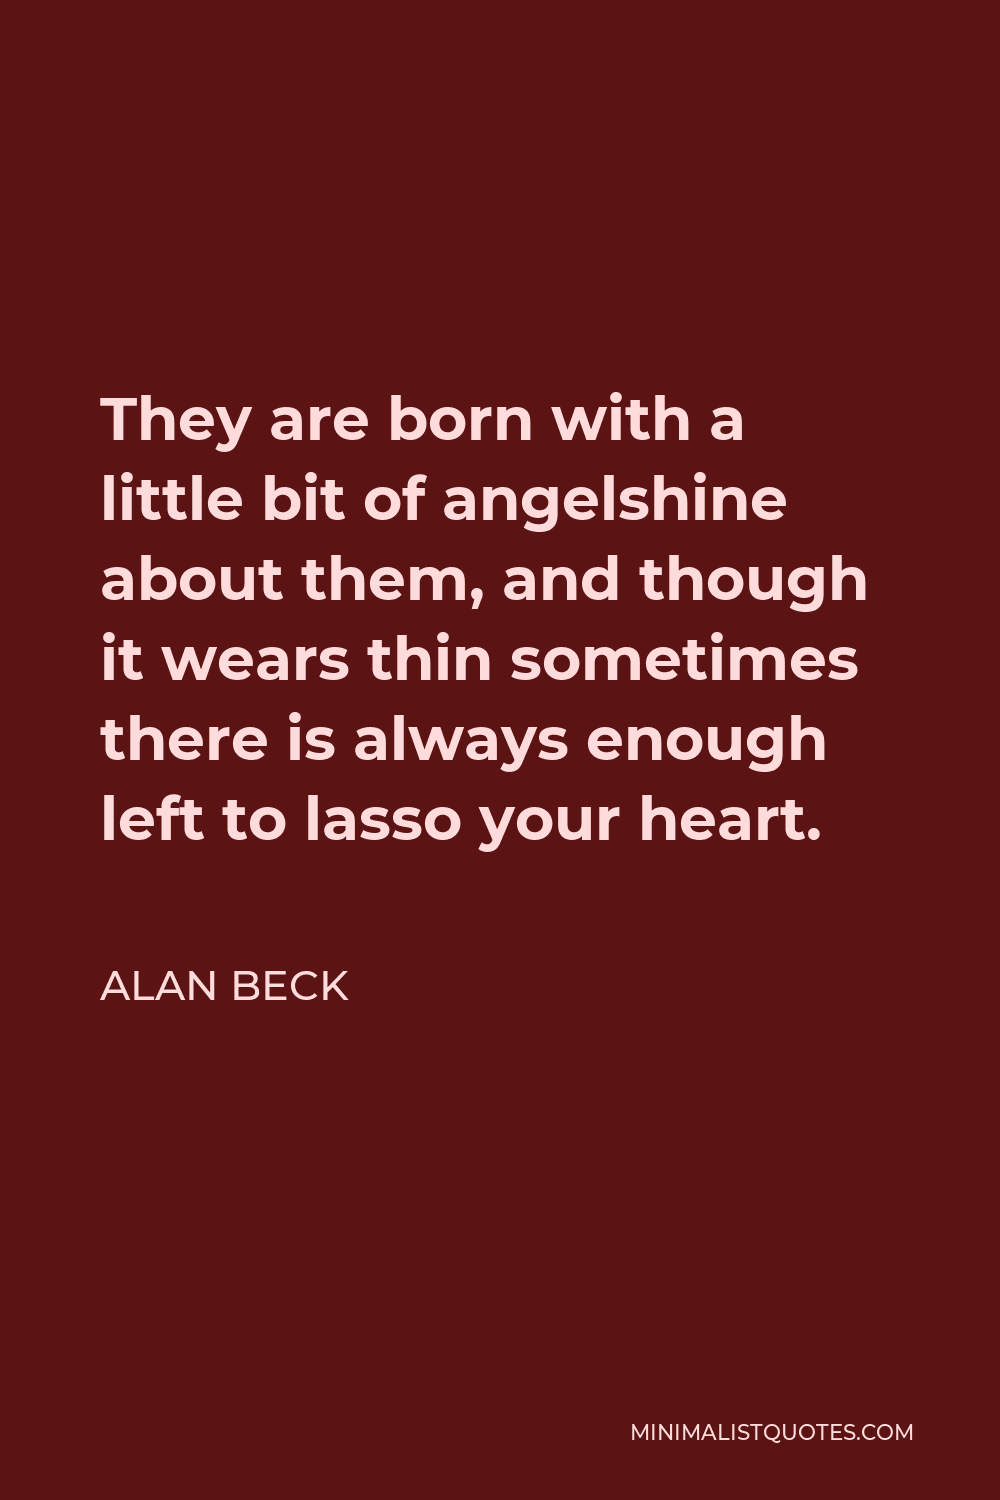 Alan Beck Quote - They are born with a little bit of angelshine about them, and though it wears thin sometimes there is always enough left to lasso your heart.